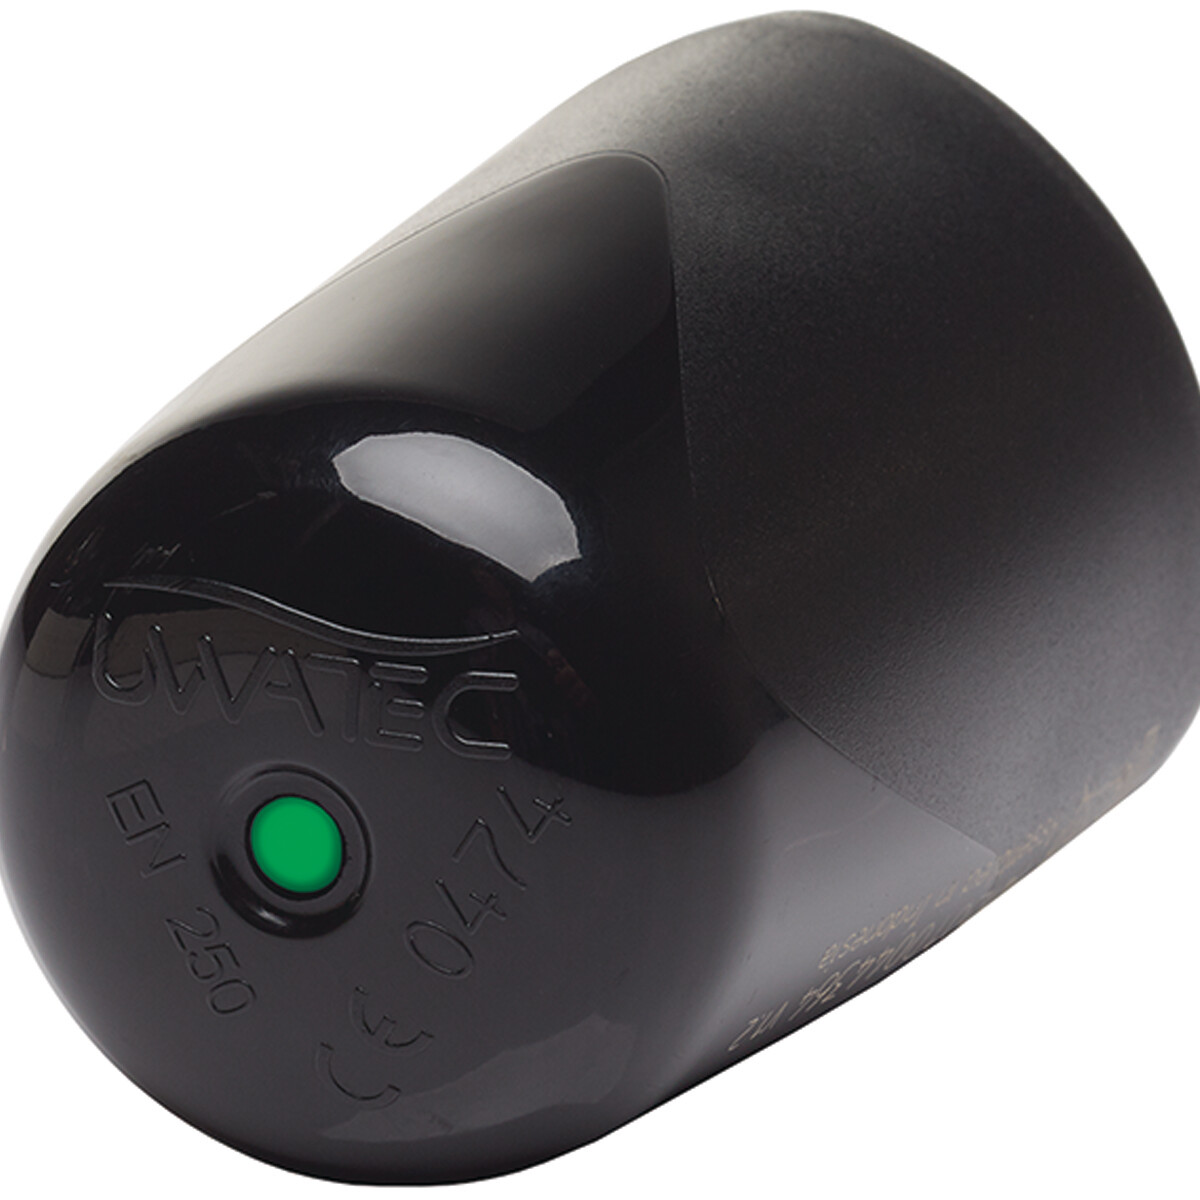 LED SMART+ TRANSMITTER (compatible with G2 computer)